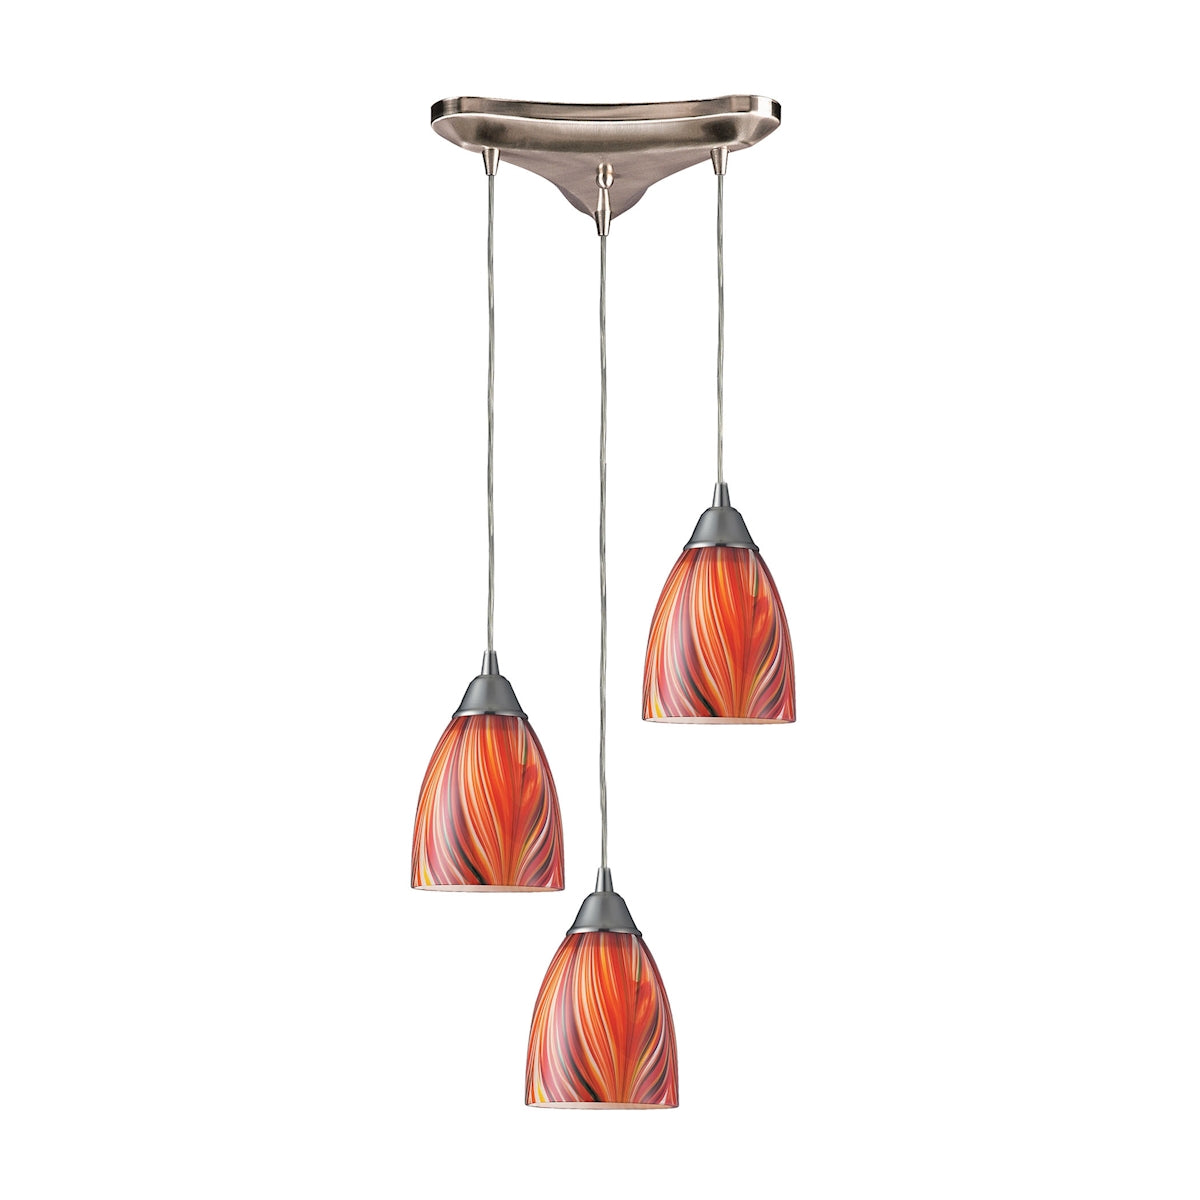 Arco Baleno 3-Light Triangular Pendant Fixture in Satin Nickel with Multi-colored Glass